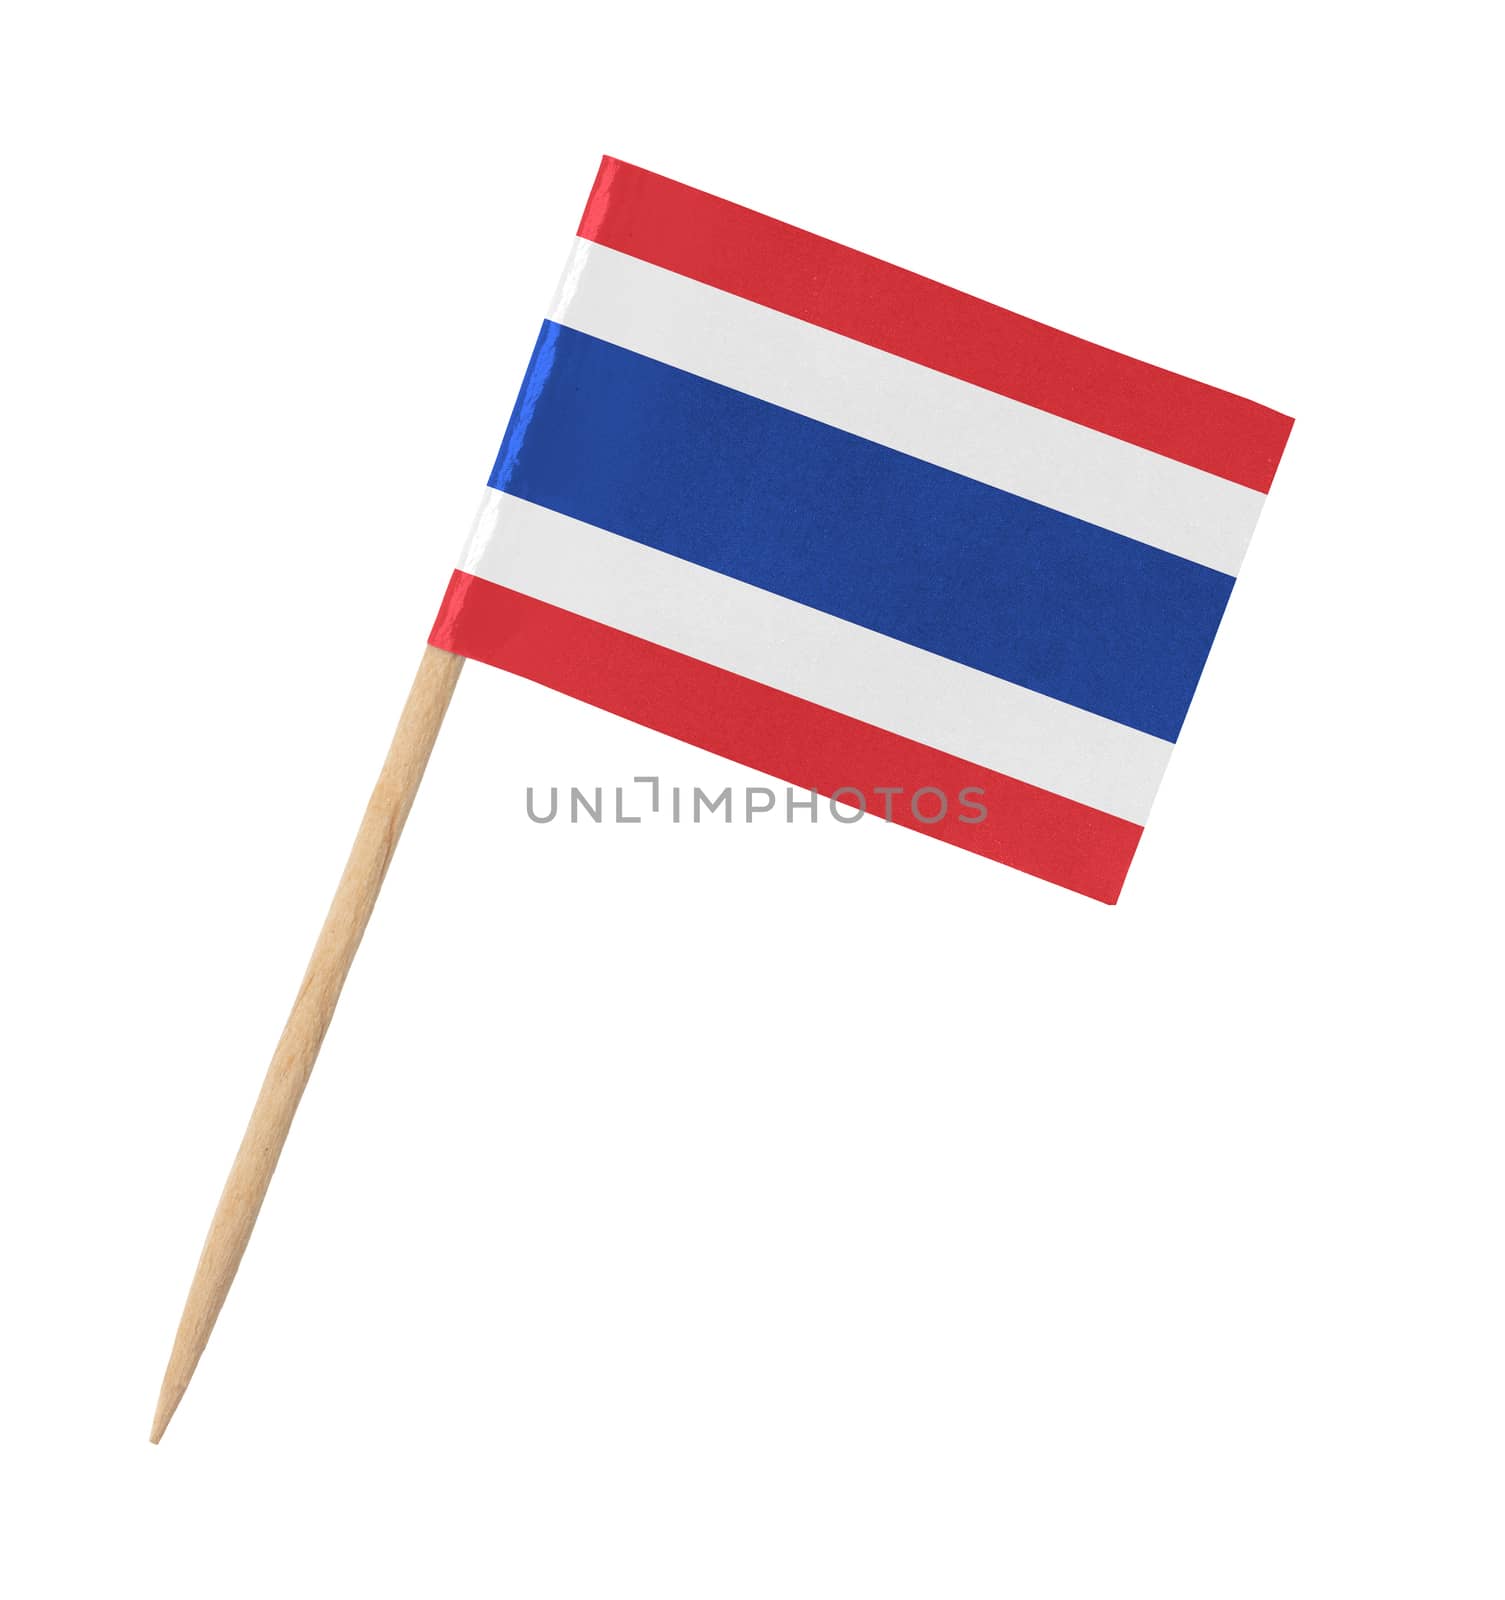 Small paper Thai flag on wooden stick, isolated on white